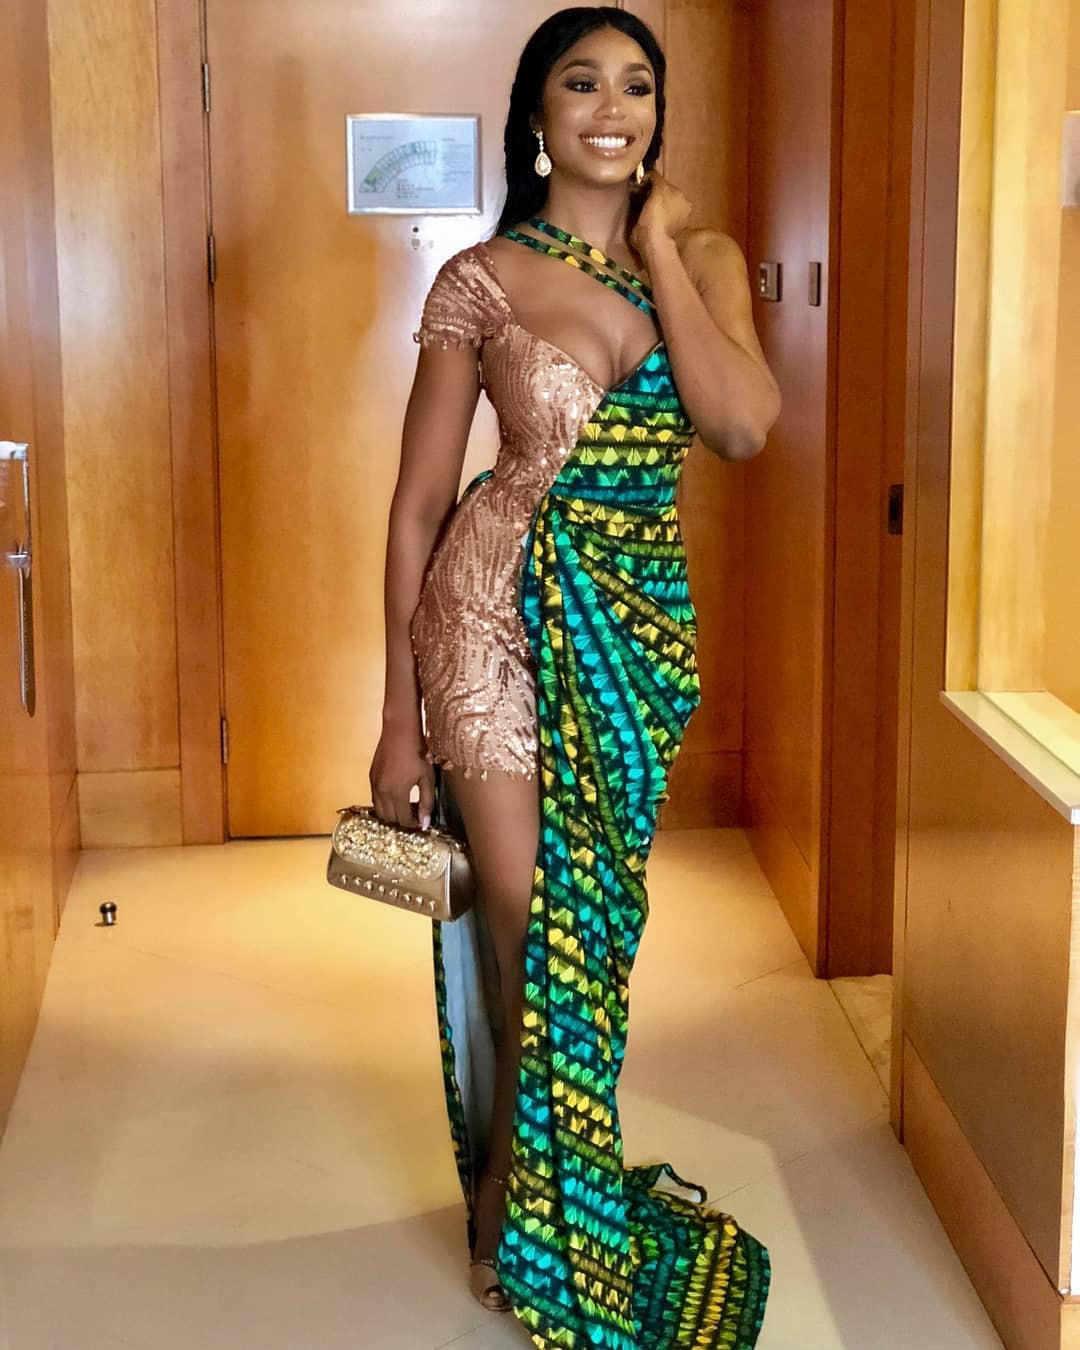 Latest African Dress Inspo For Black Women: African fashion,  Ankara Dresses,  Ankara Fashion,  Ankara Outfits,  Colorful Dresses,  Printed Ankara,  African Dresses  